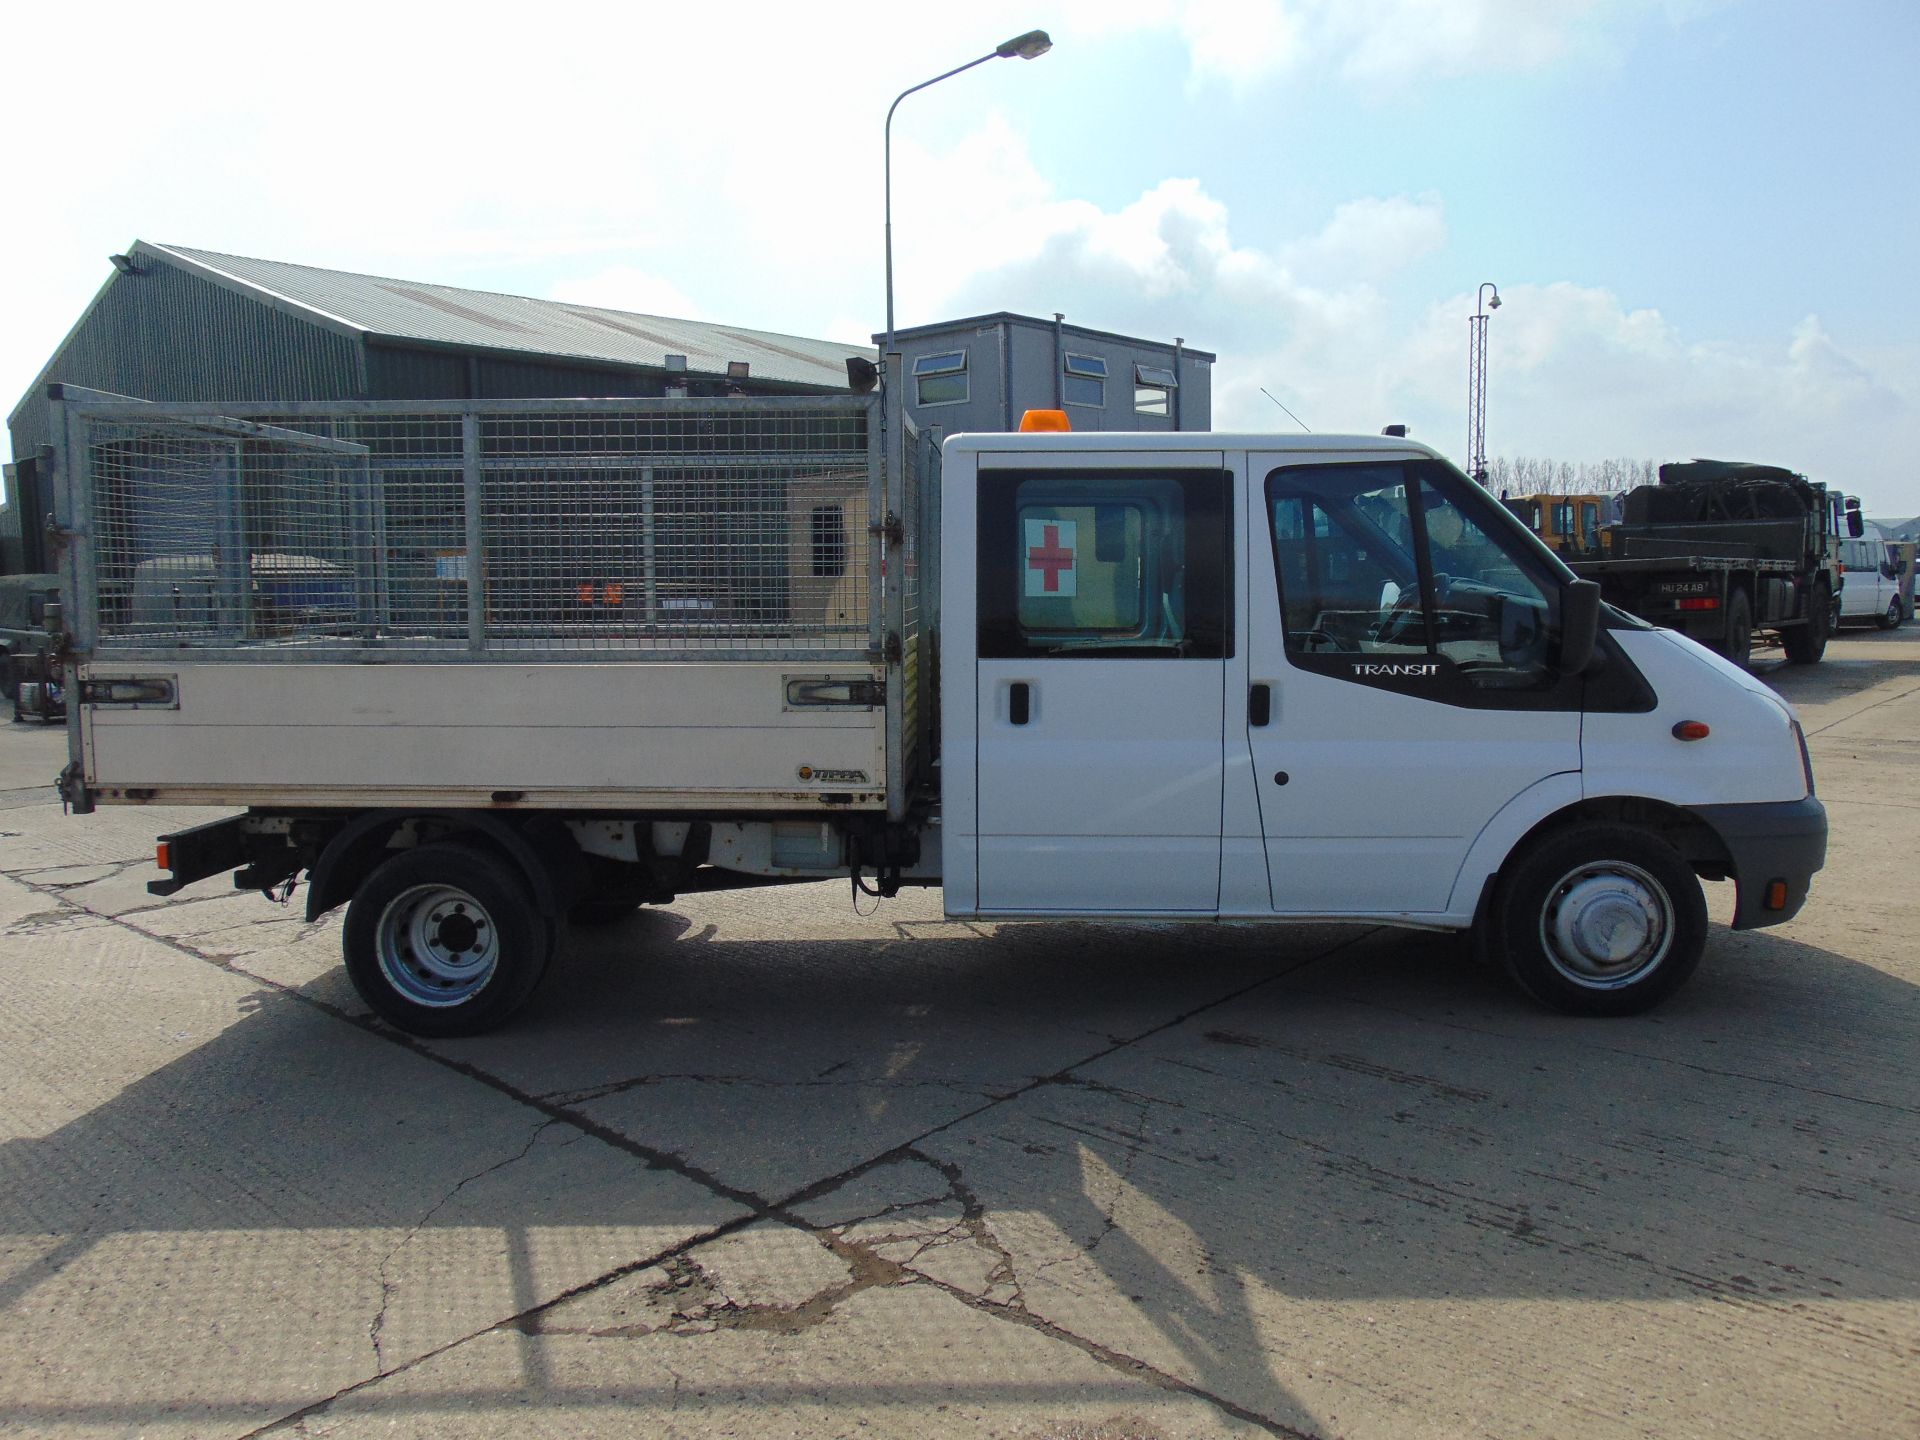 2008 Ford Transit 115 T350 Crew Cab Flat Bed Tipper - Image 6 of 16